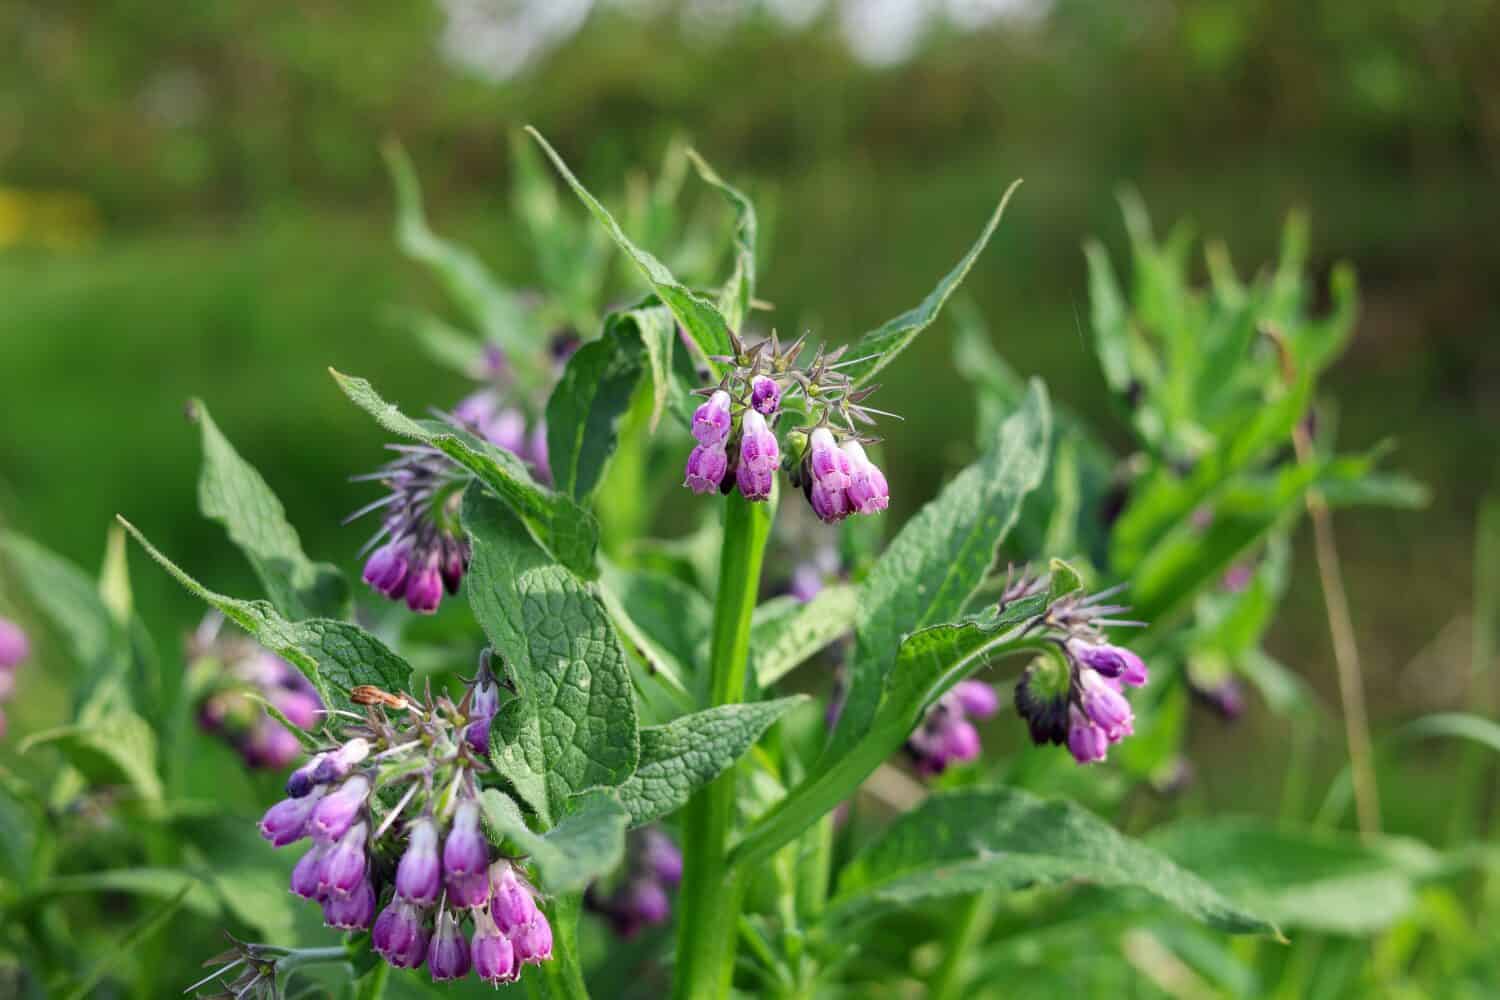 Portrait Herdibal Comfrey Herb, Symphytum officinale in the wild, which is a perennial flowering plant in the family Boraginaceae